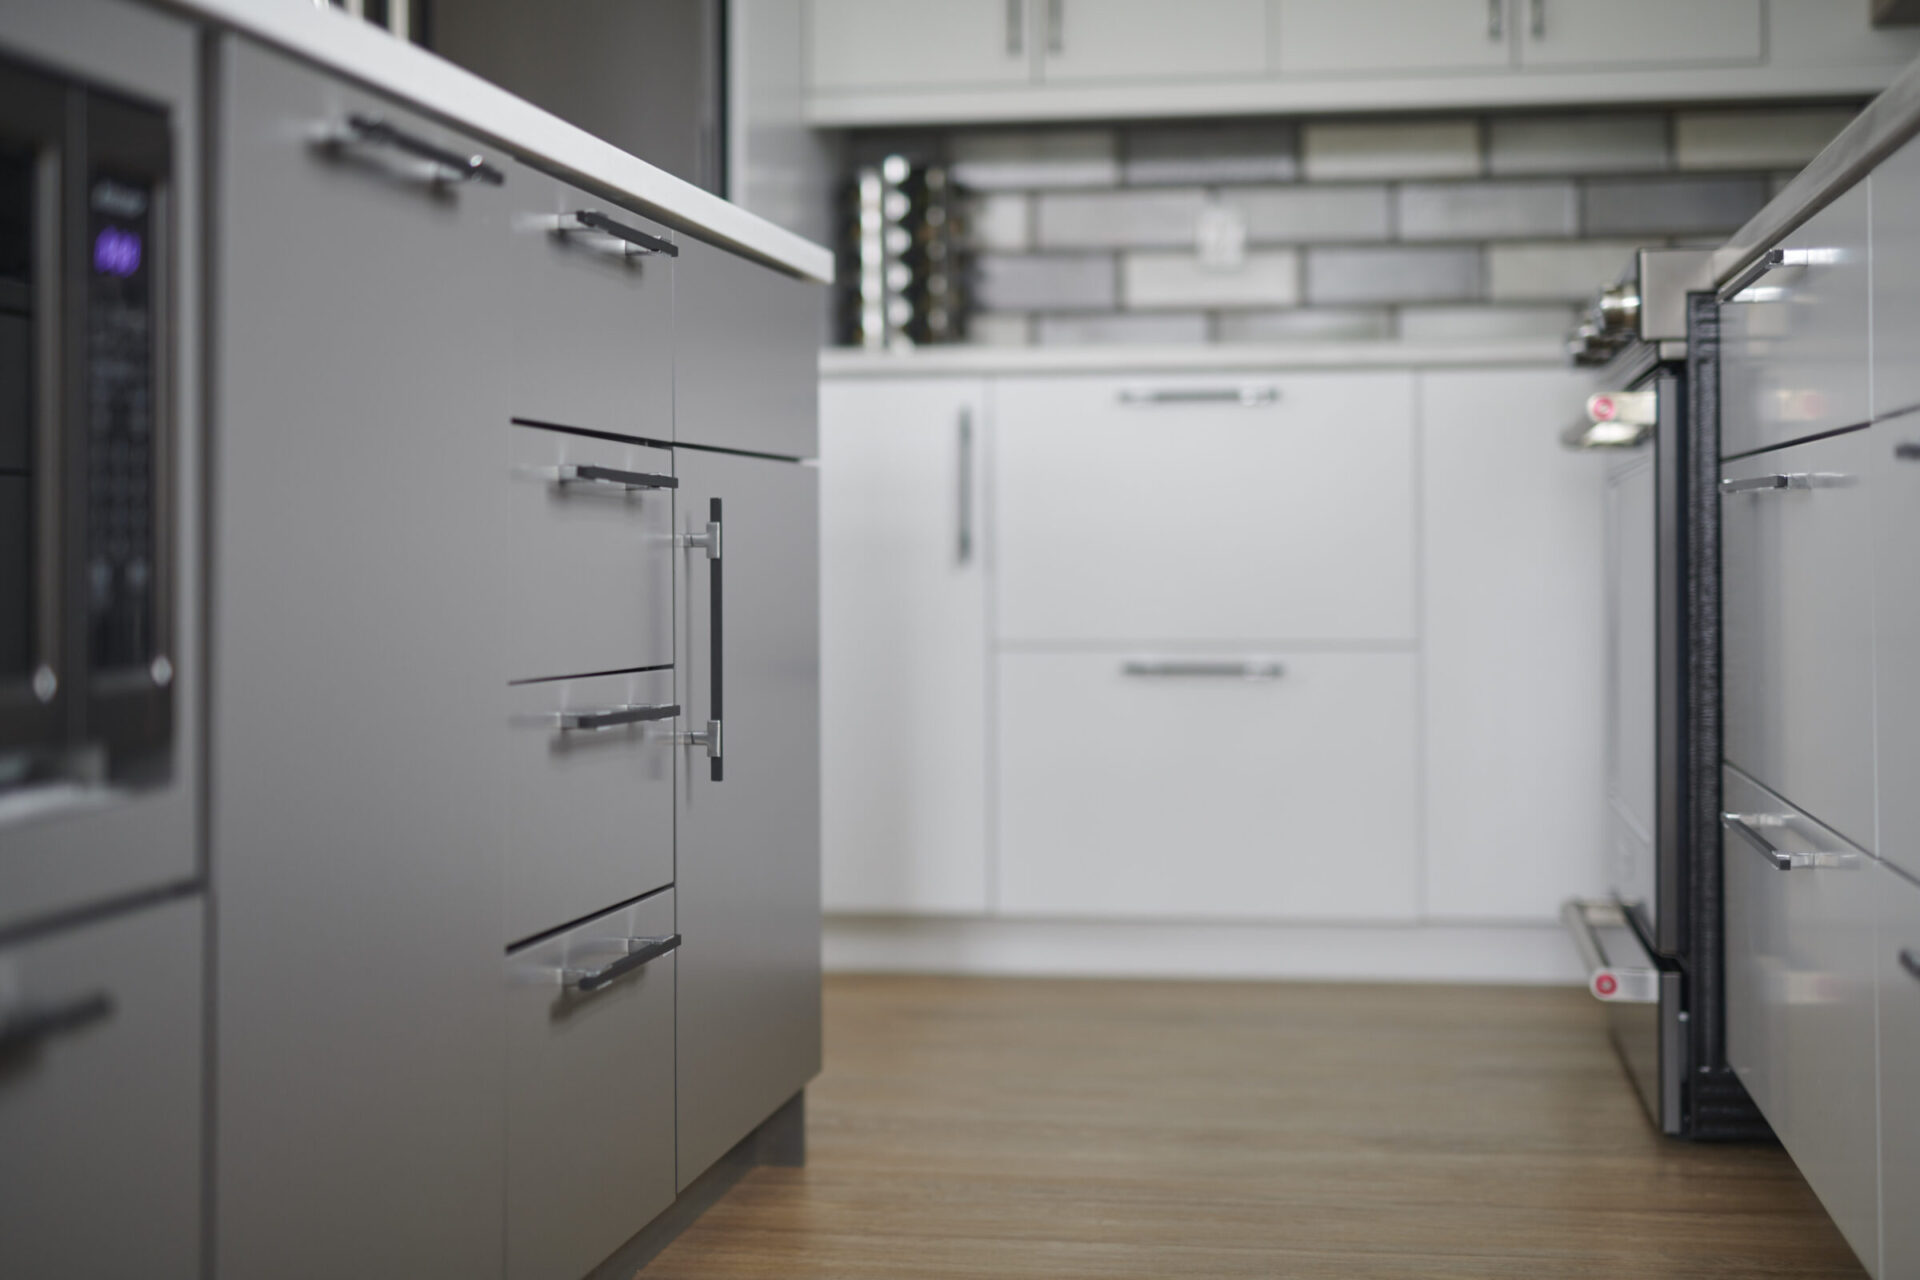 A modern kitchen with gray cabinets, stainless steel handles, white countertops, and a tiled backsplash. Focus is on the foreground with a blurred background.